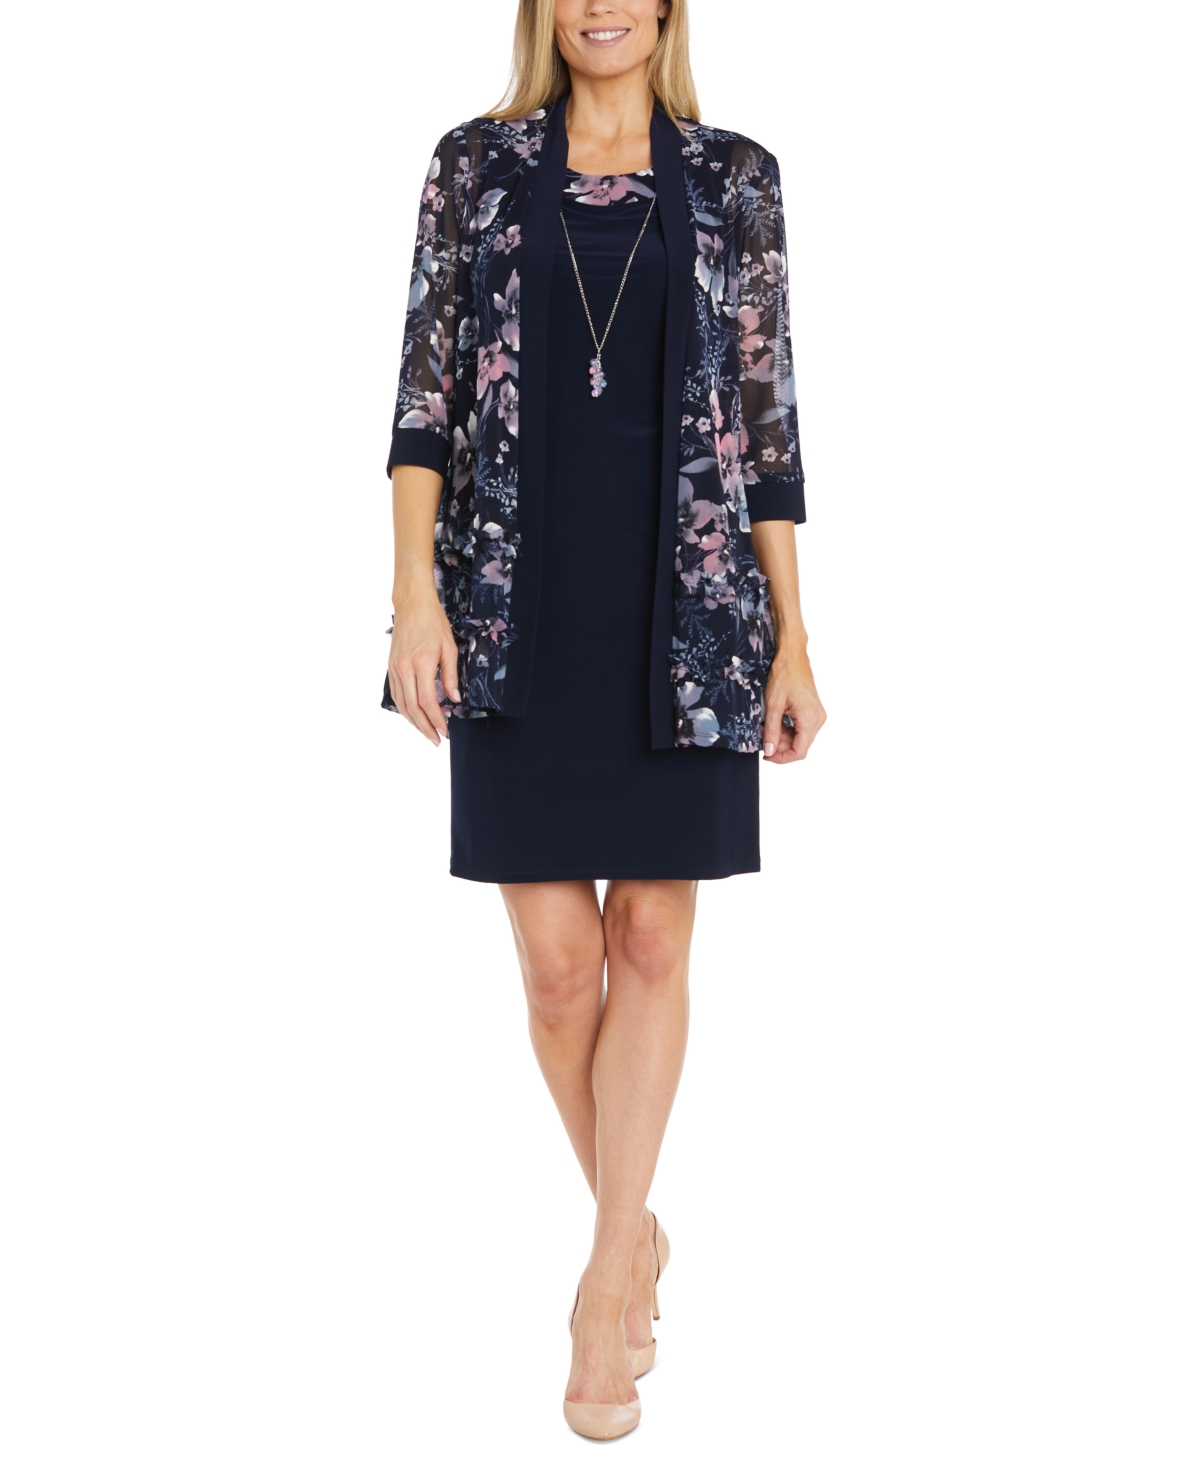 Petite Floral Mesh Jacket and Contrast-Trim Sleeveless Dress - Navy/pink